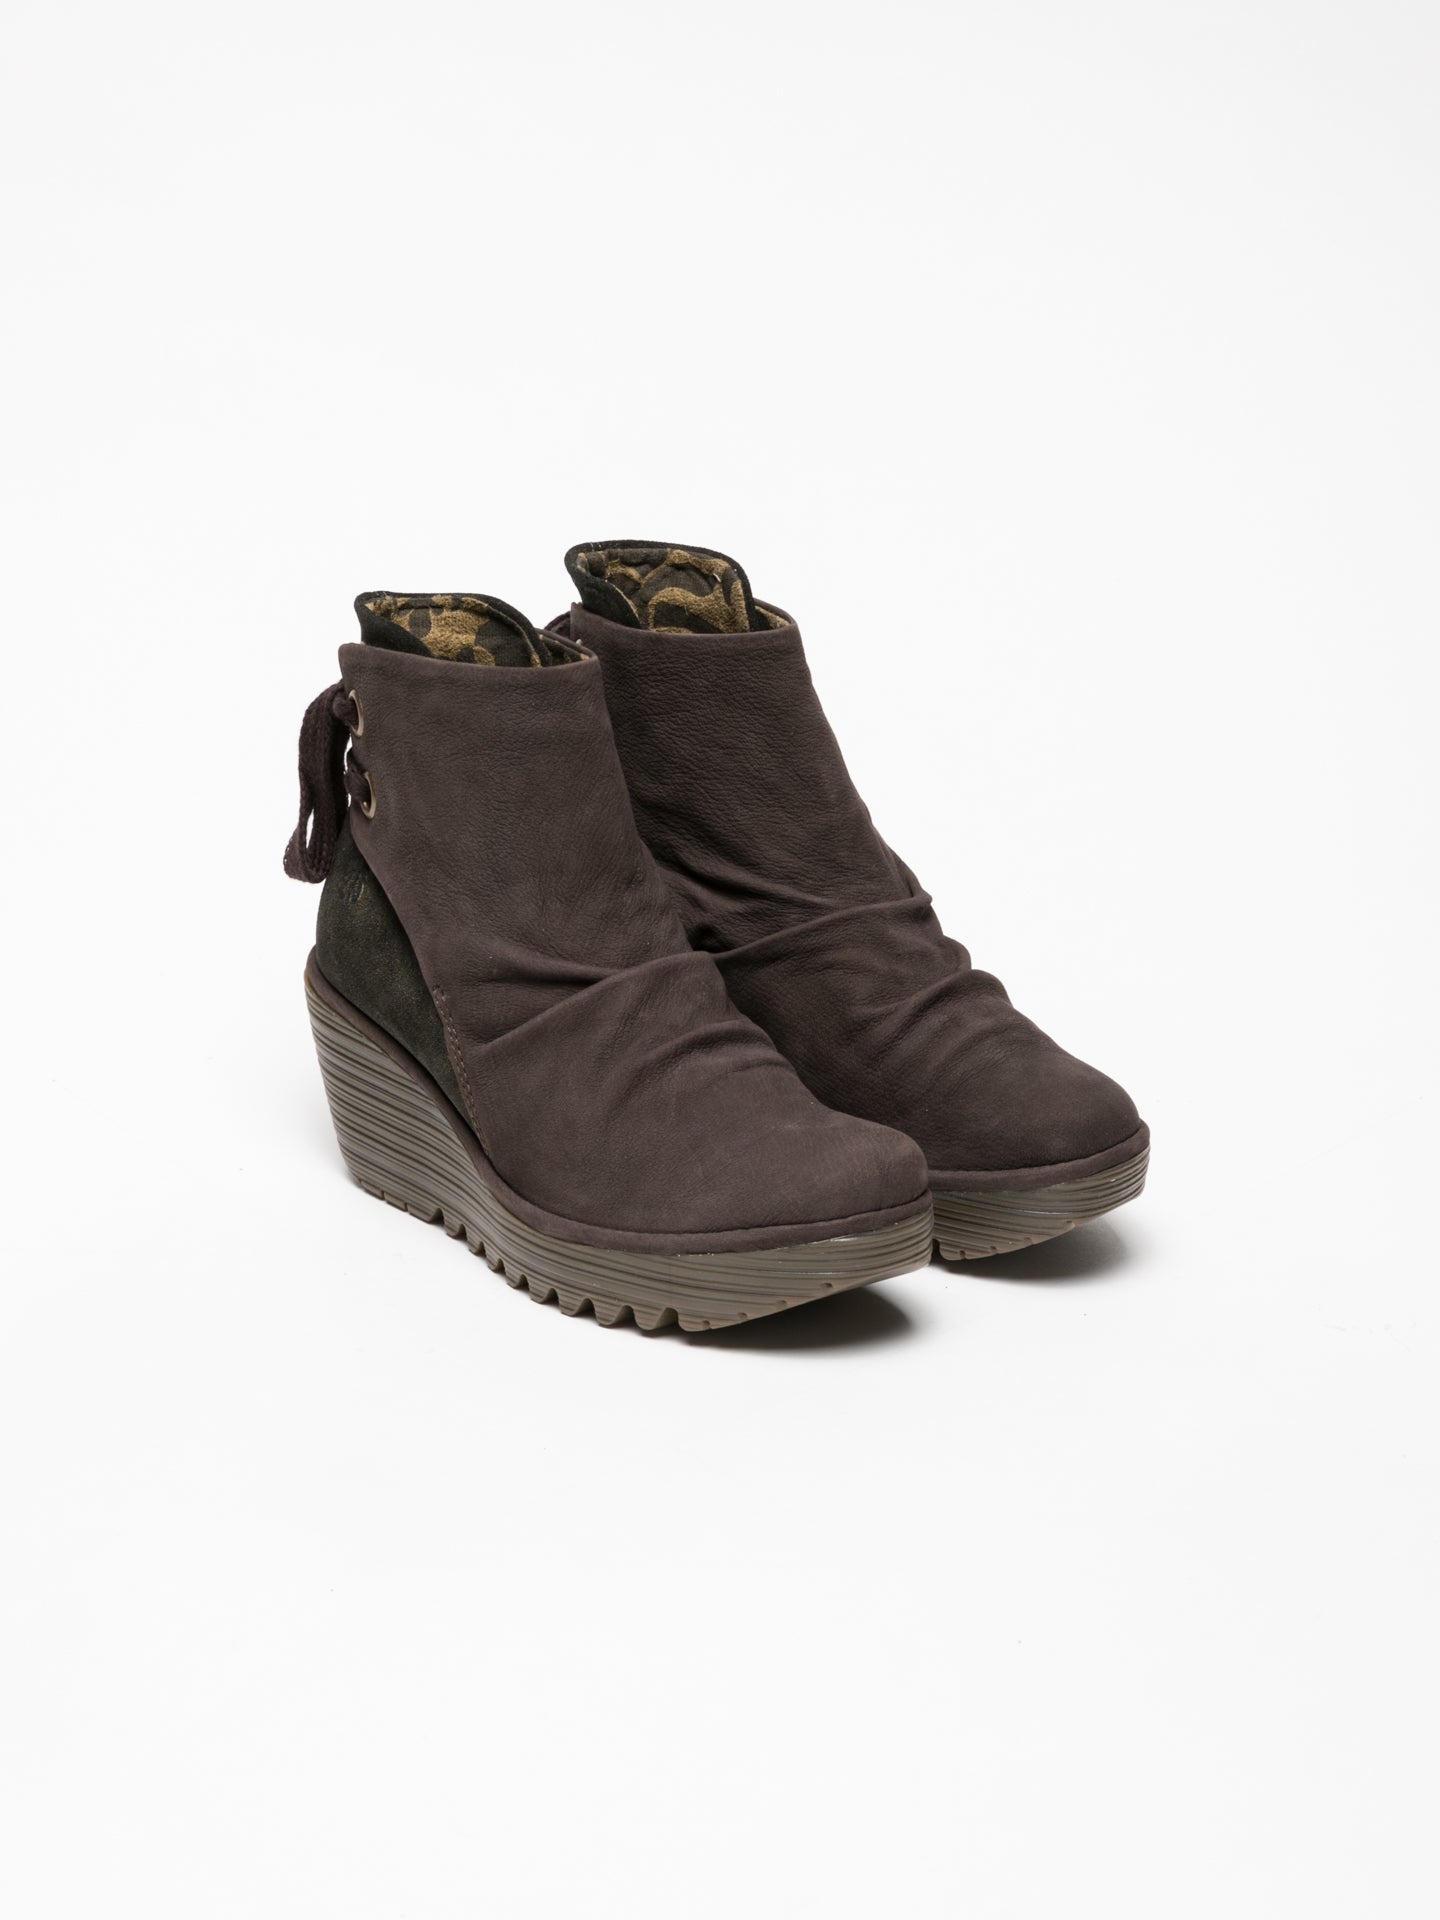 Fly London Brown Wedge Ankle Boots